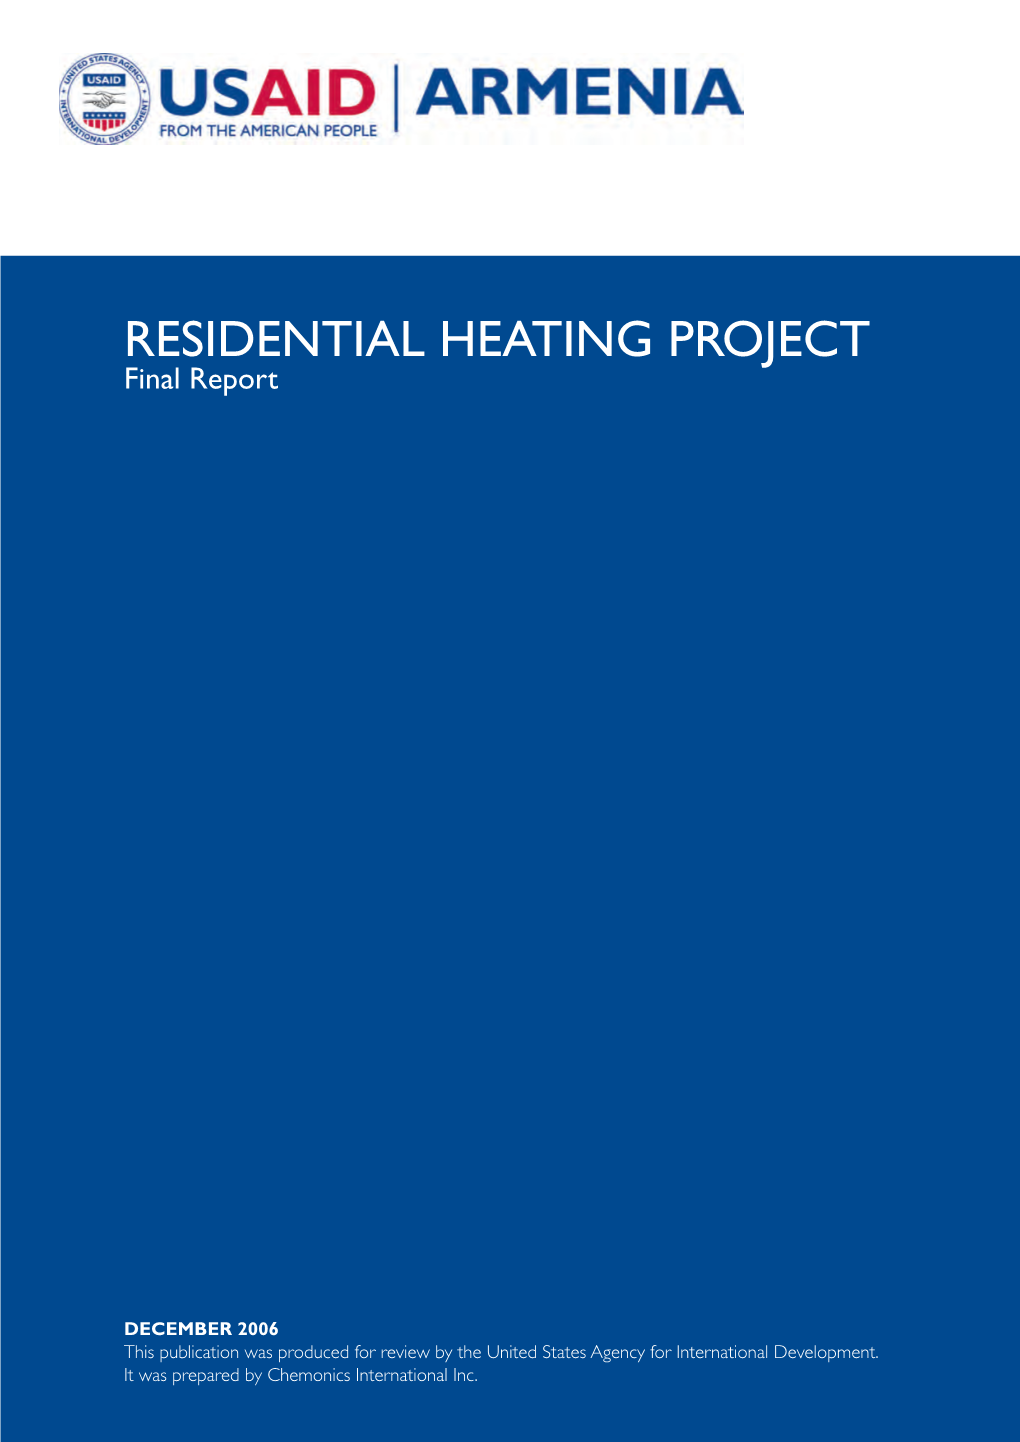 Residential Heating Project Final Report